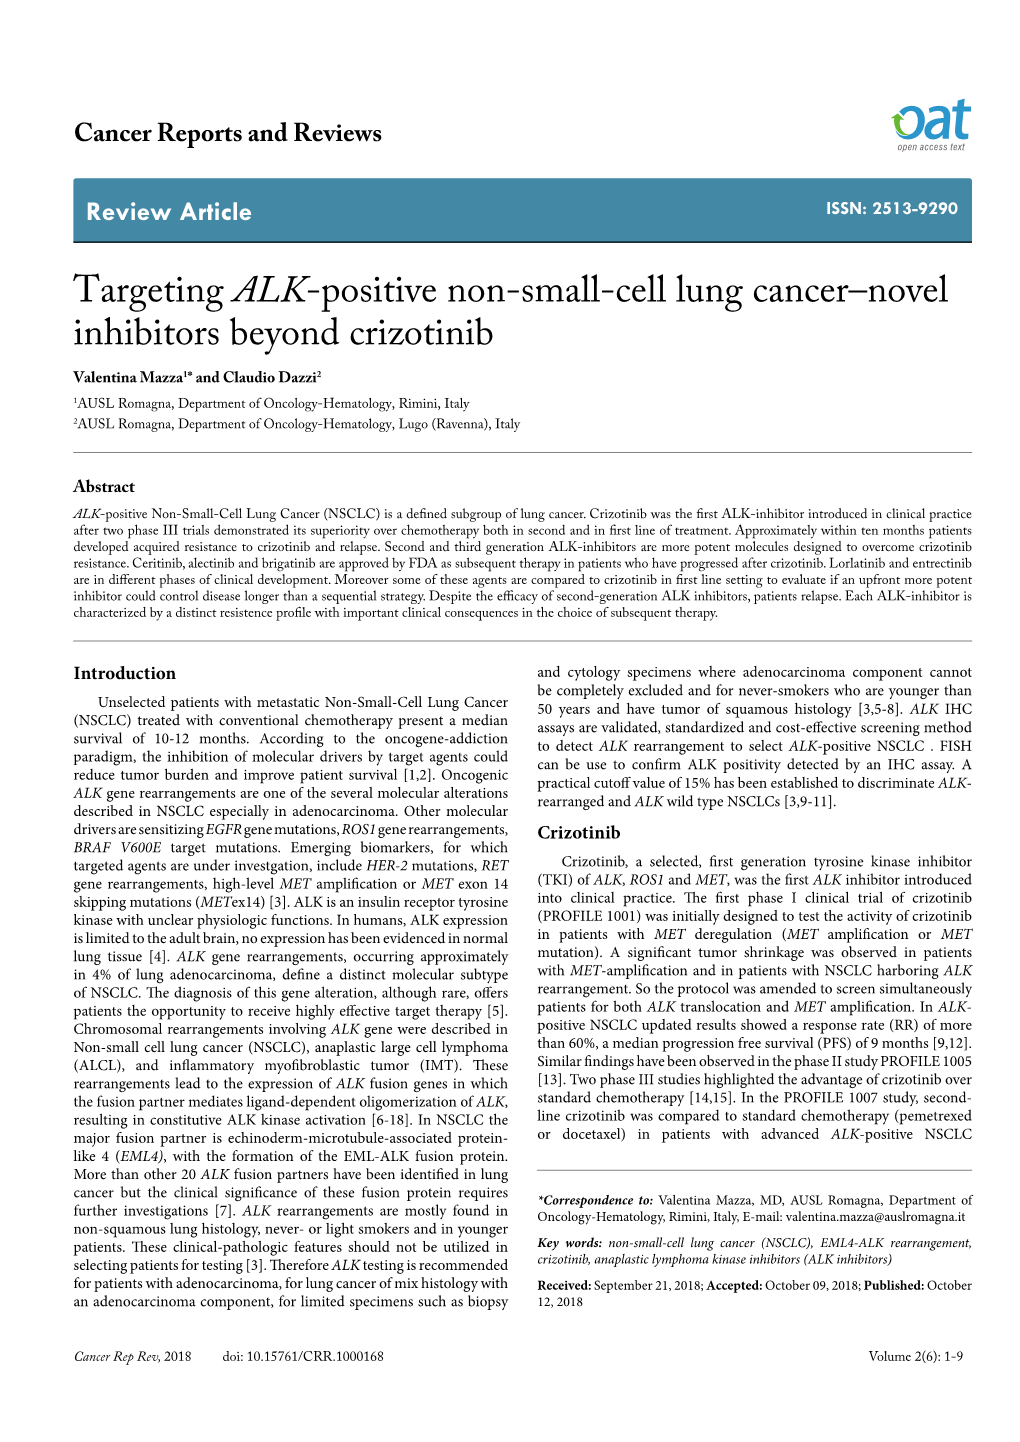 Targeting ALK-Positive Non-Small-Cell Lung Cancer–Novel Inhibitors